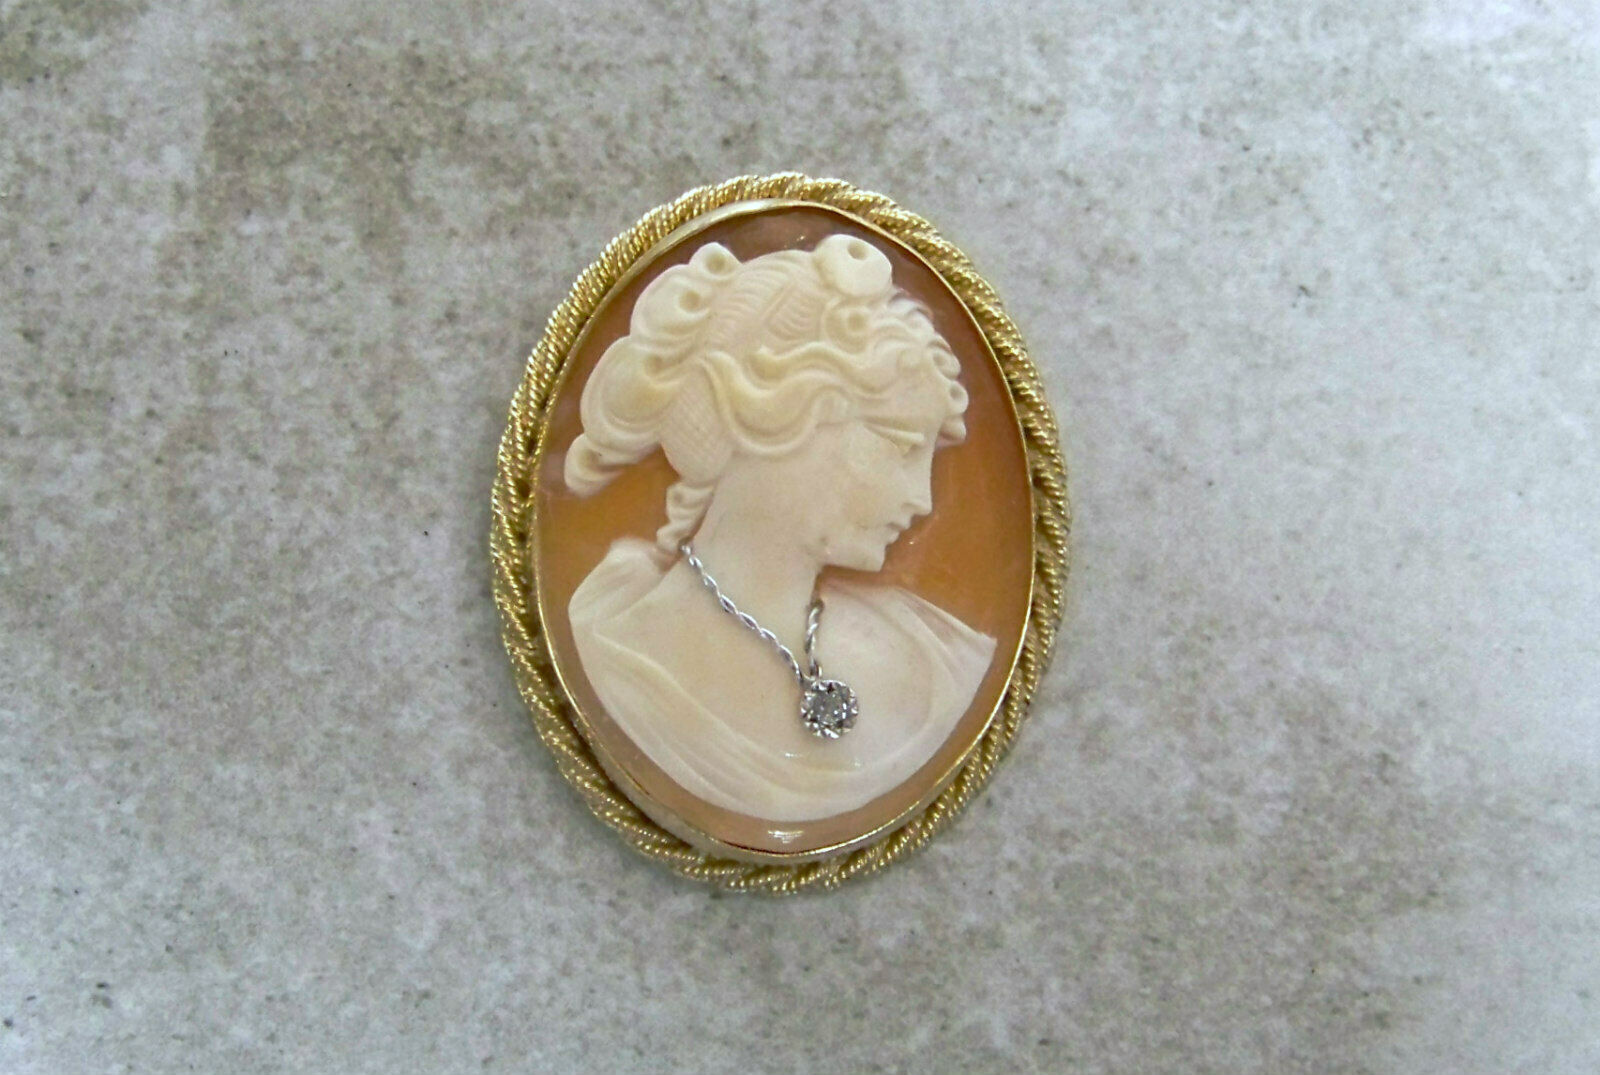 Cameo Lady W Diamond Necklace Habille Pin / Pendant Signed Carved Shell Vintage